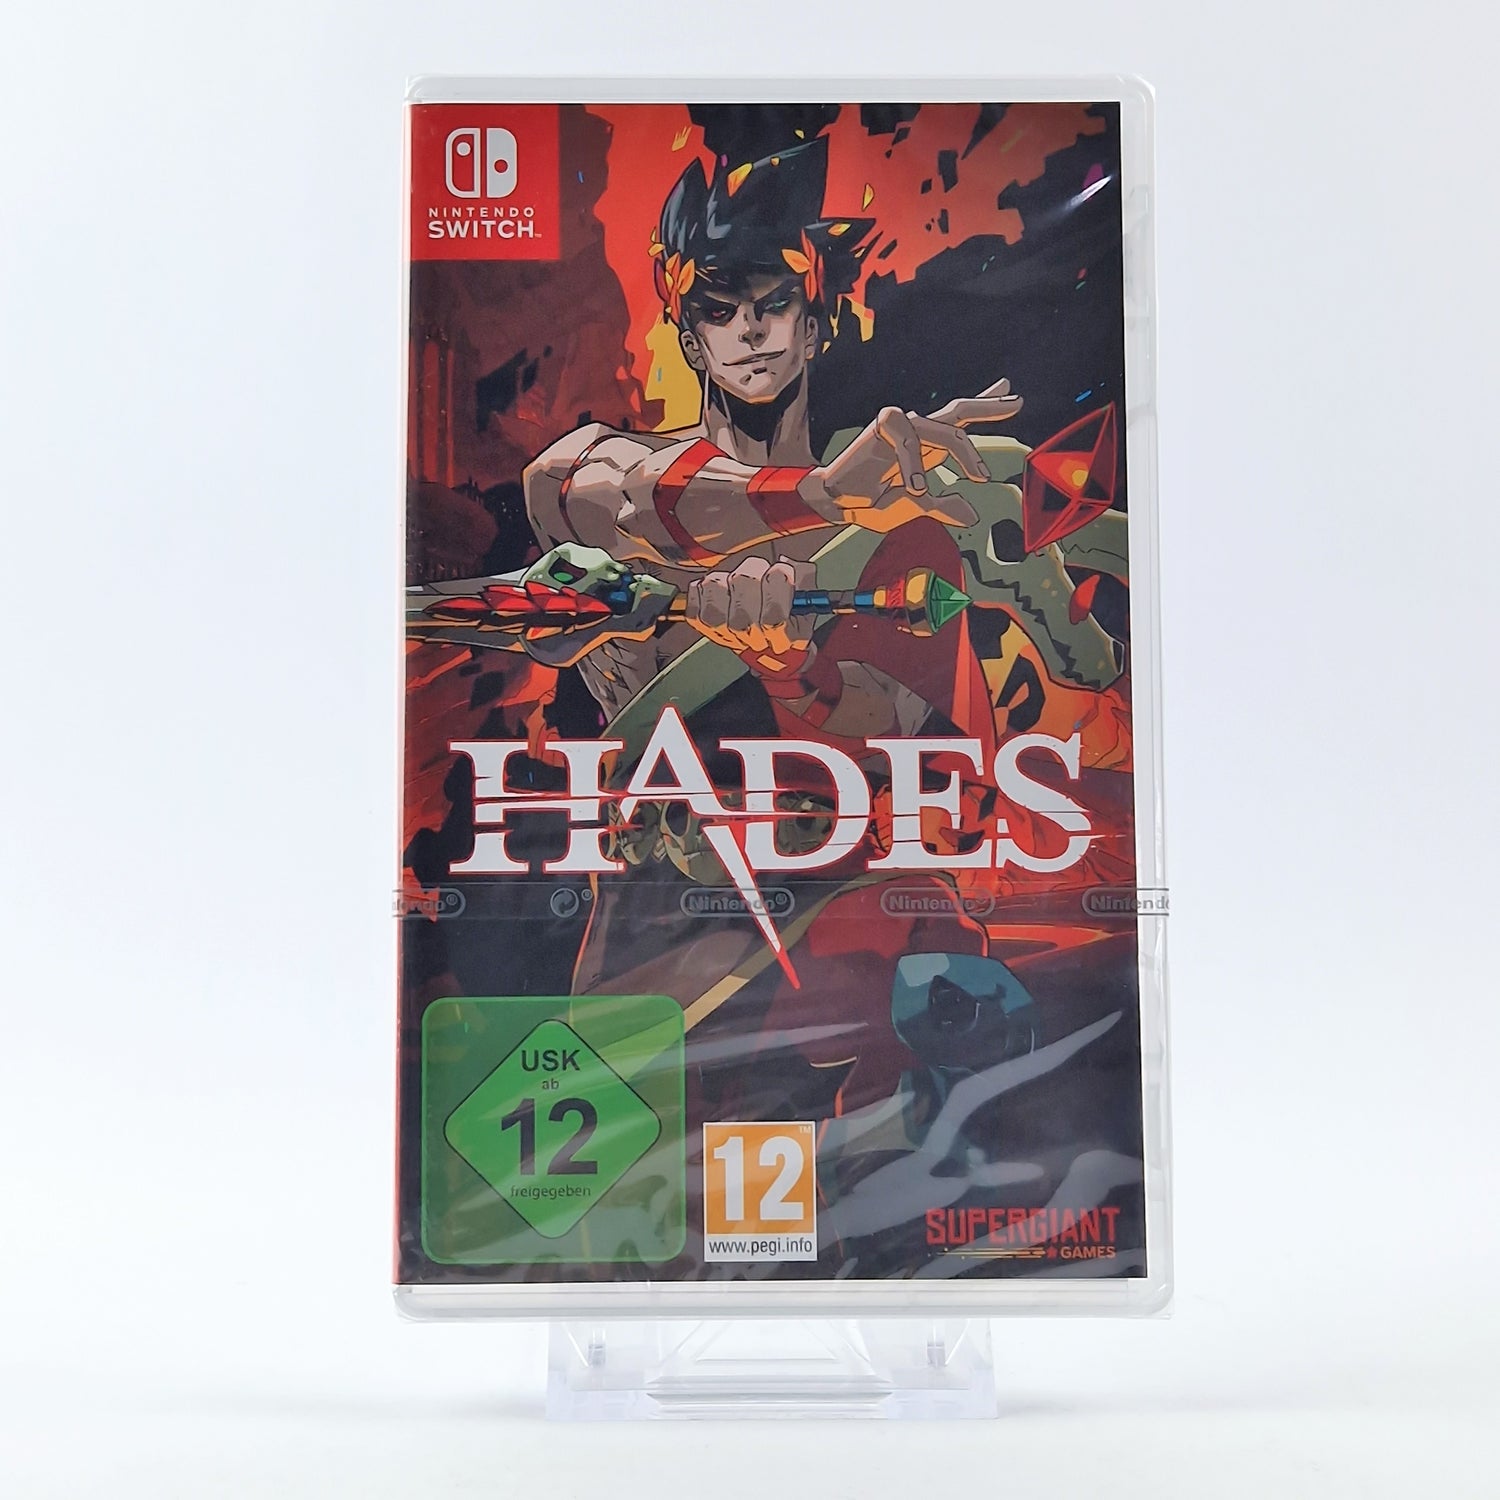 Nintendo Switch game: Hades - OVP NEW NEW SEALED